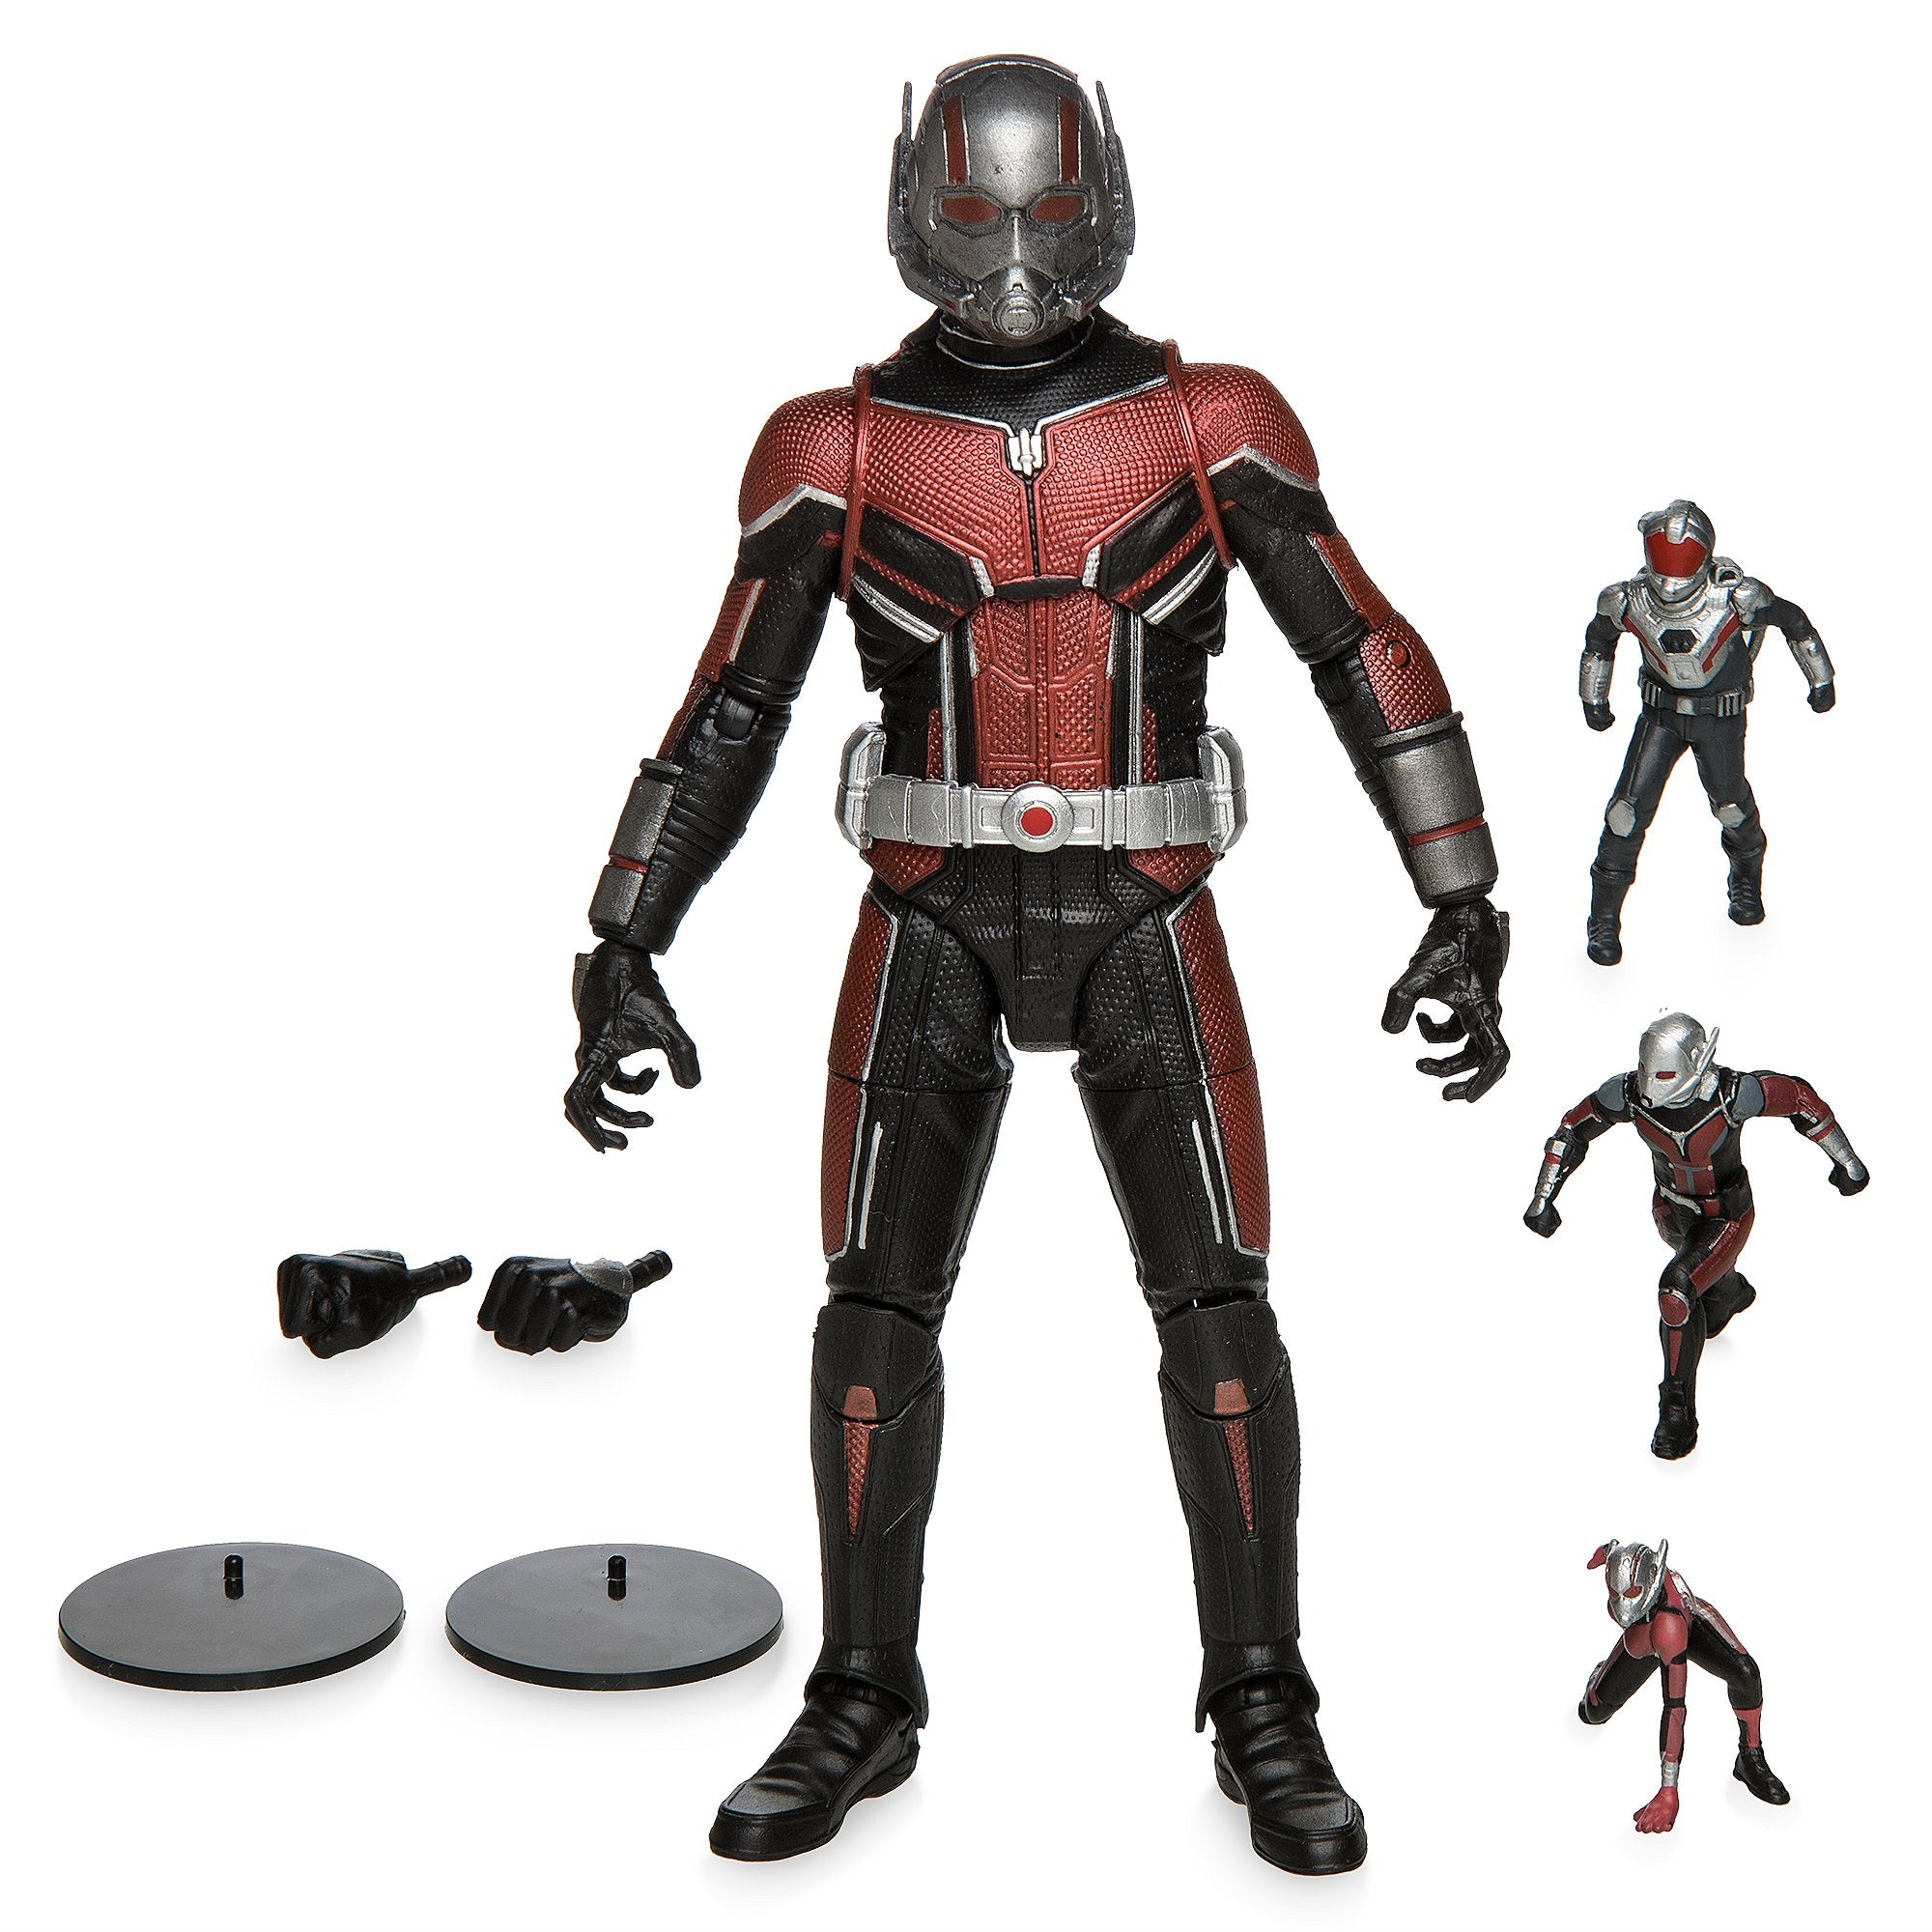 Marvel Select Antman & the Wasp: Ant-Man | Diamond Select Toys